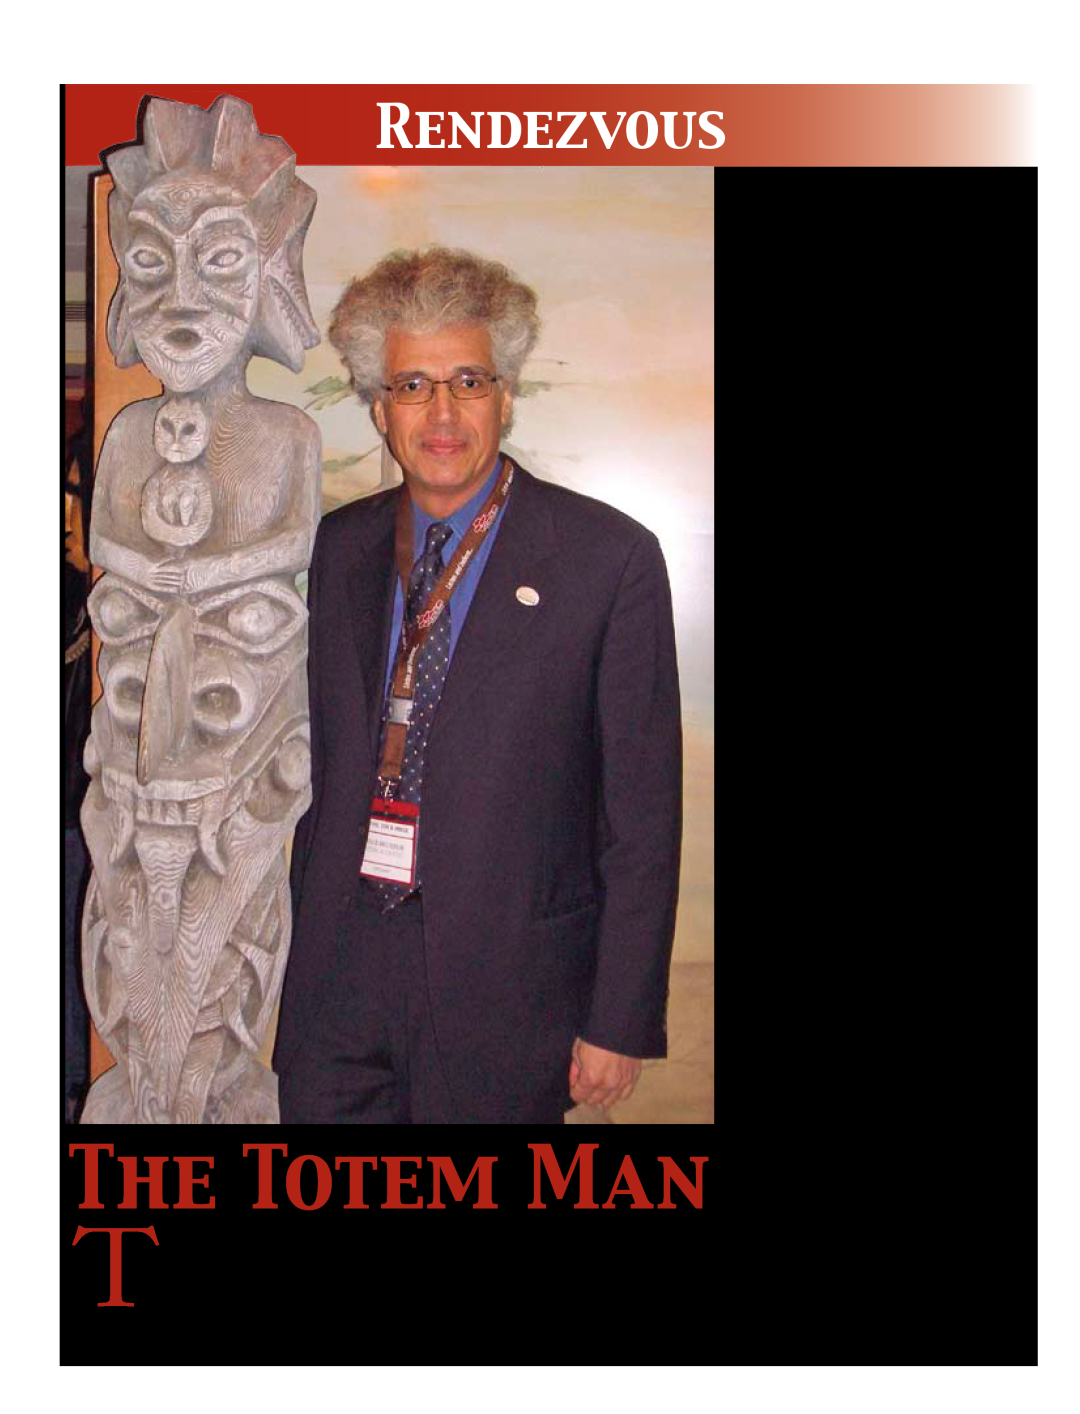 Koss 76 Rendezvous, The Totem Man, he first time we ever met Vince, say that we encouraged him to persevere, mini-monitor 